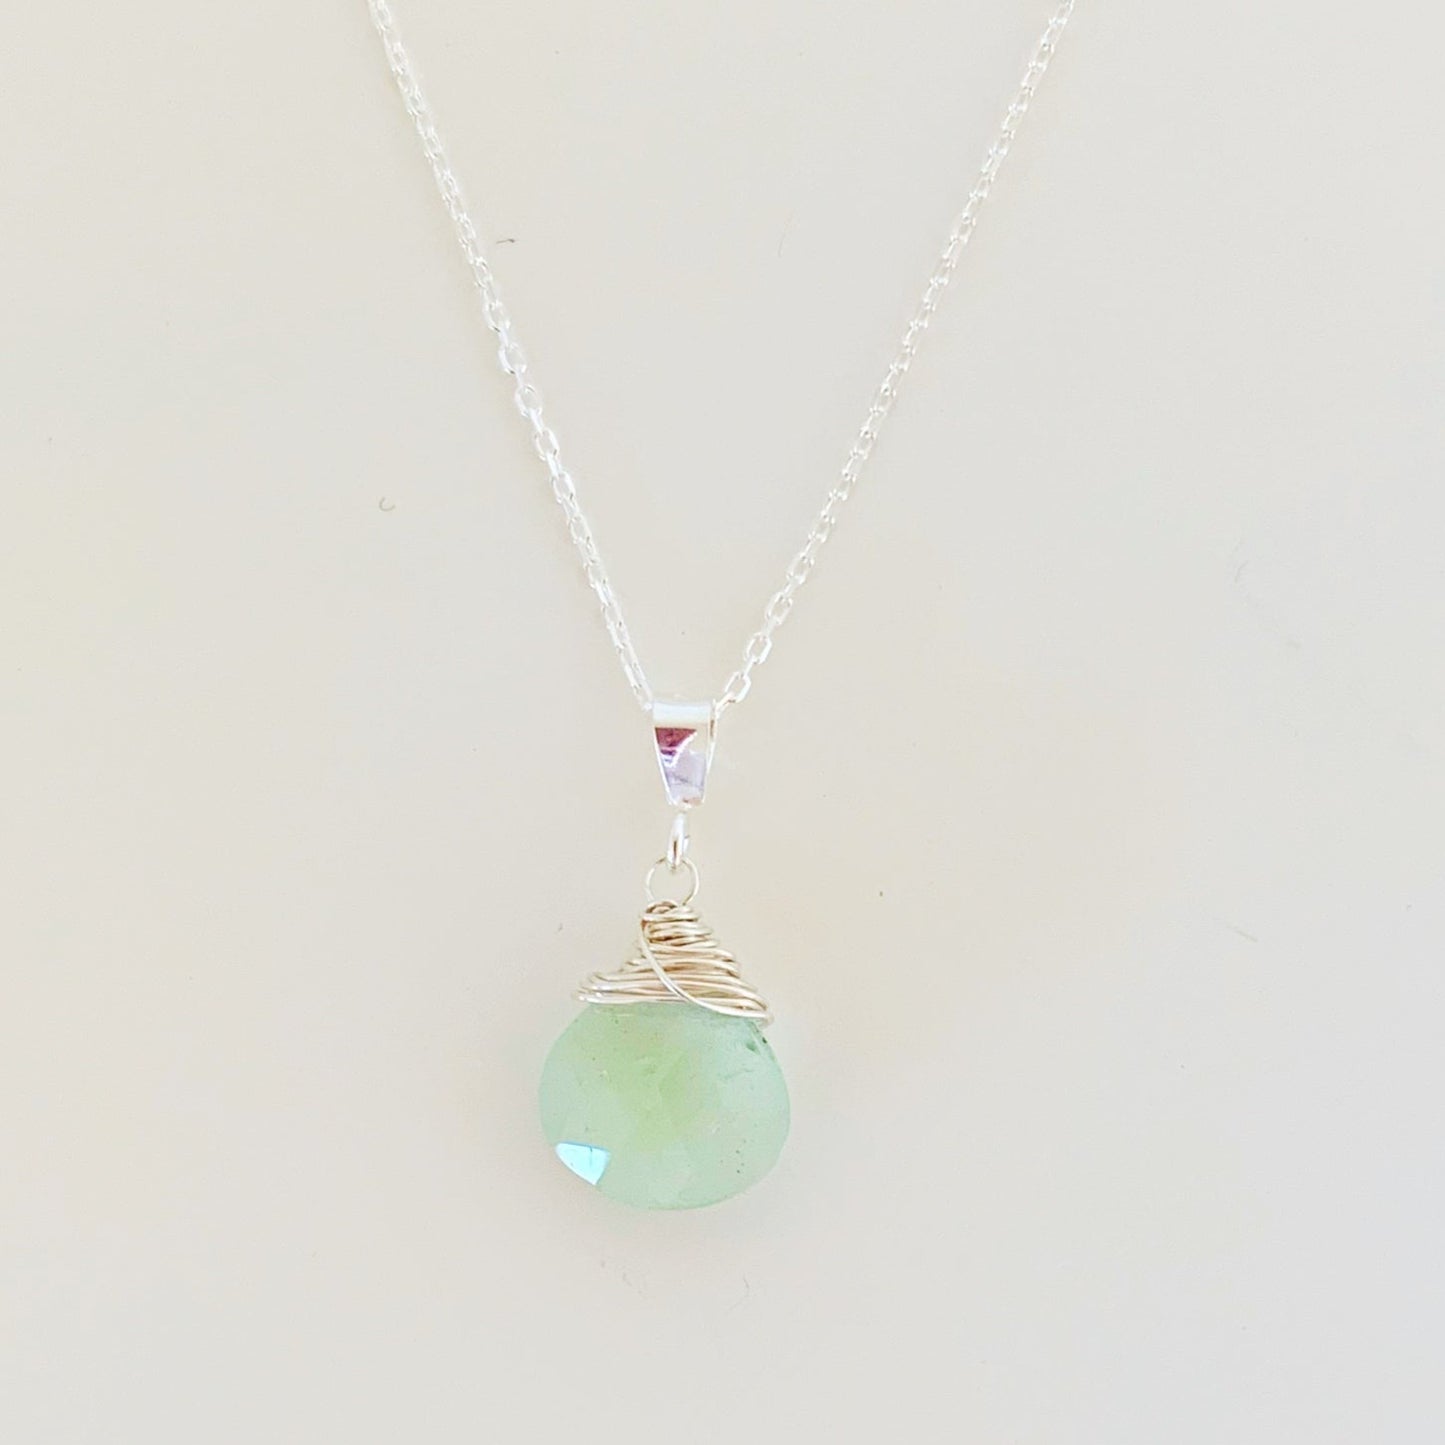 the raindrop necklace by mermaids and madeleines is a pendant design created with a faceted aquamarine briolette wire wrapped with sterling silver and hanging from sterling silver chain. photographed on a white surface